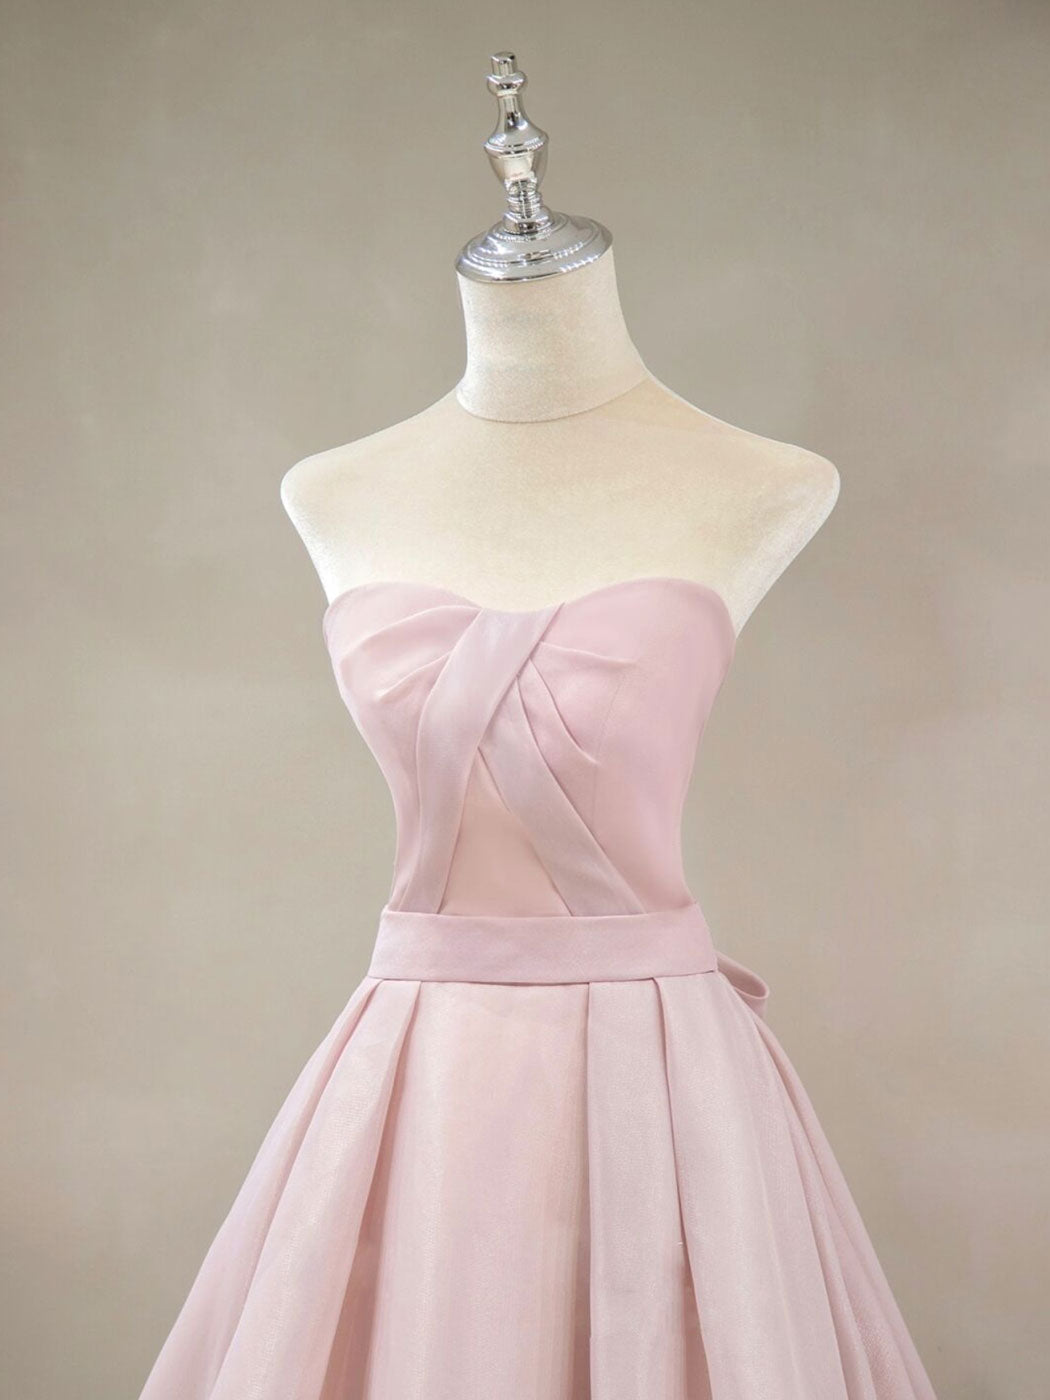 Simple Pink Long Prom Dress, Pink Formal Wedding Party Dress